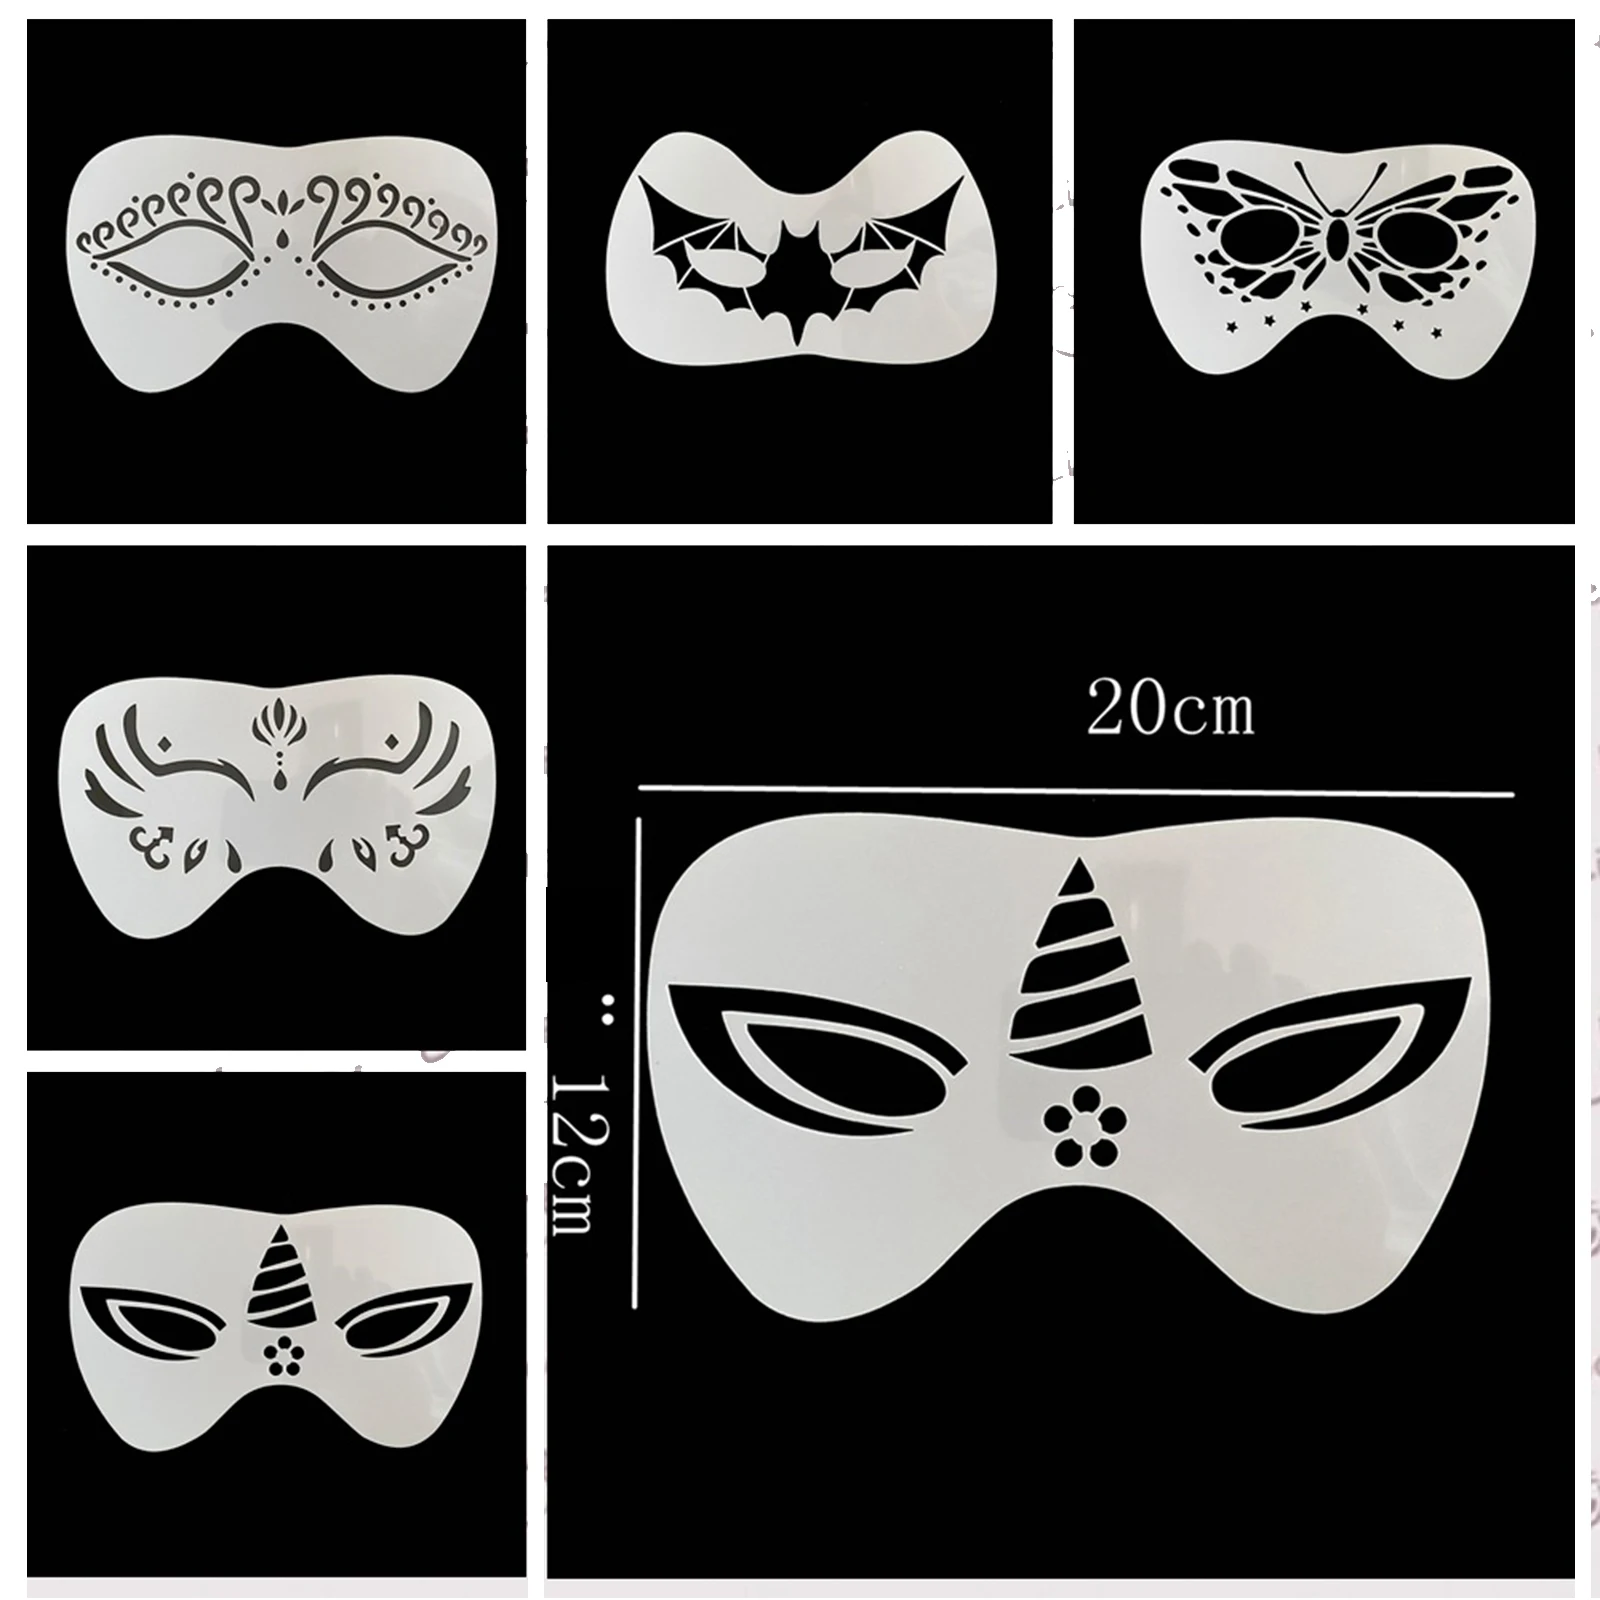 DIY Stencils Template Washable Templates for Show Carnivals Halloween Face Painting Stencils for Adults Kids Easily Use